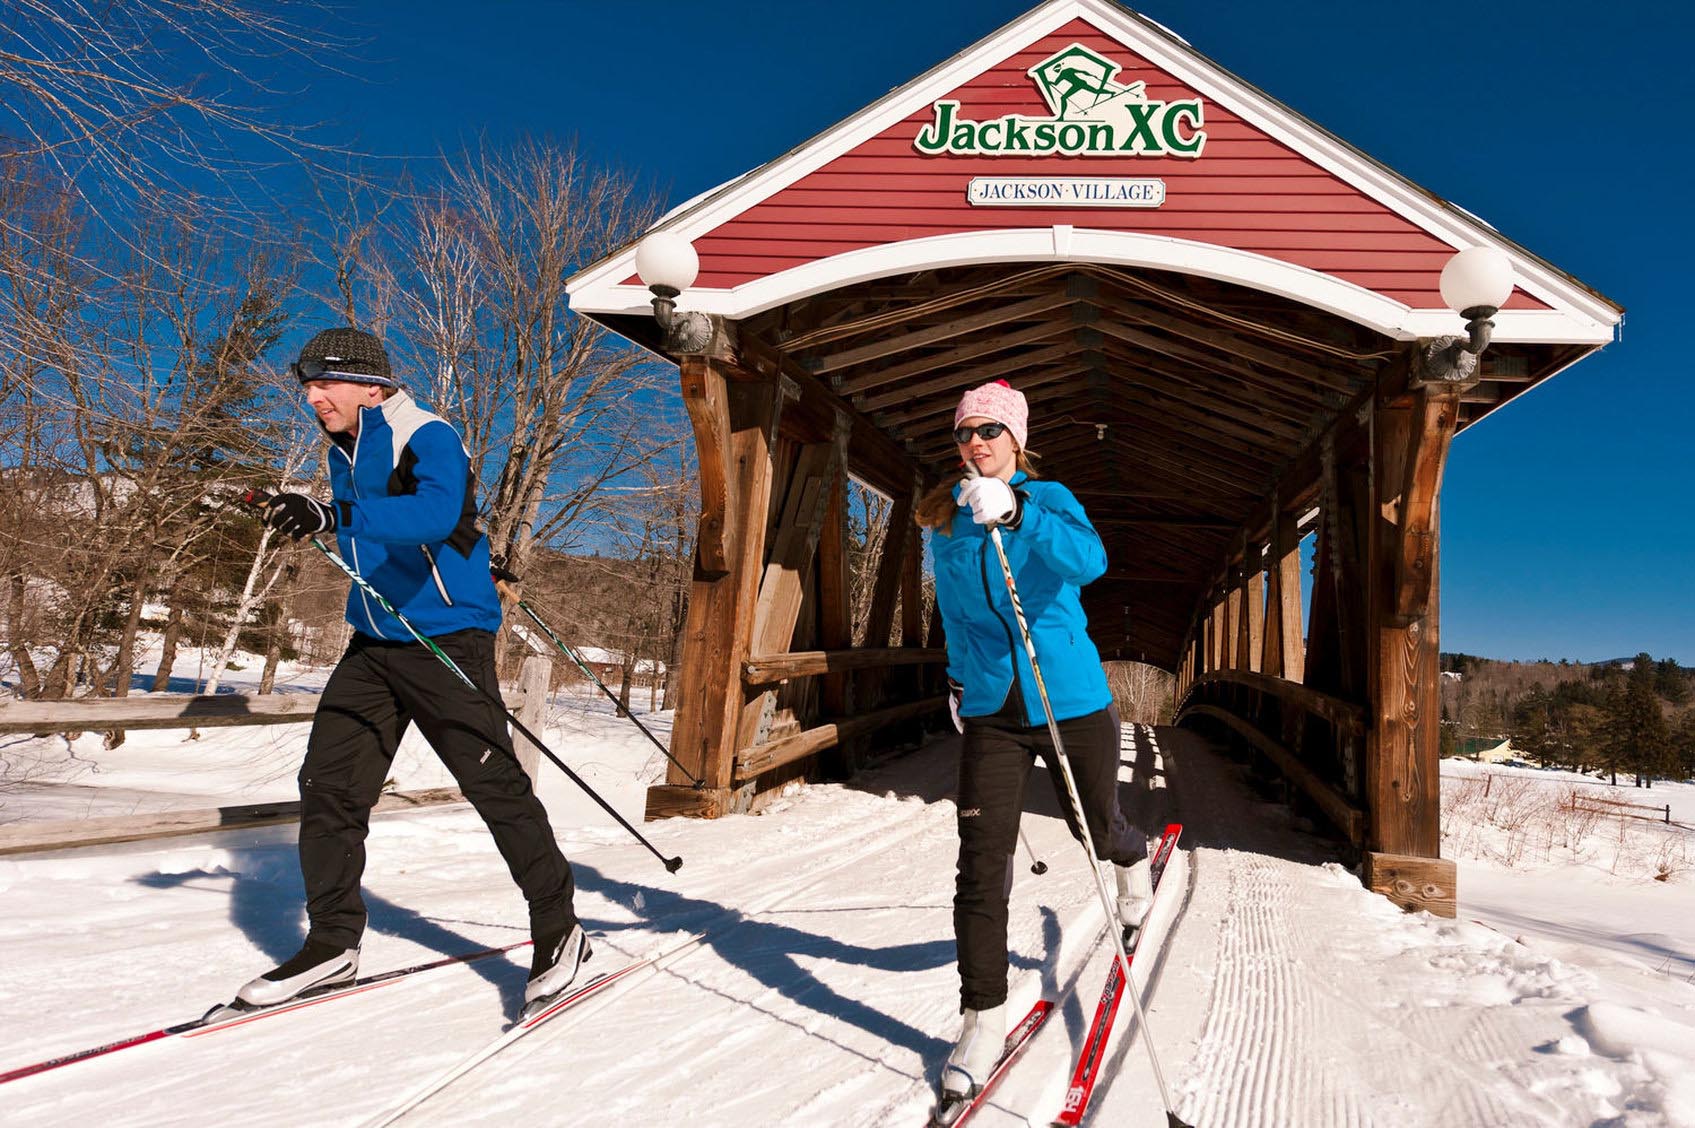 Man and woman cross country skiing 